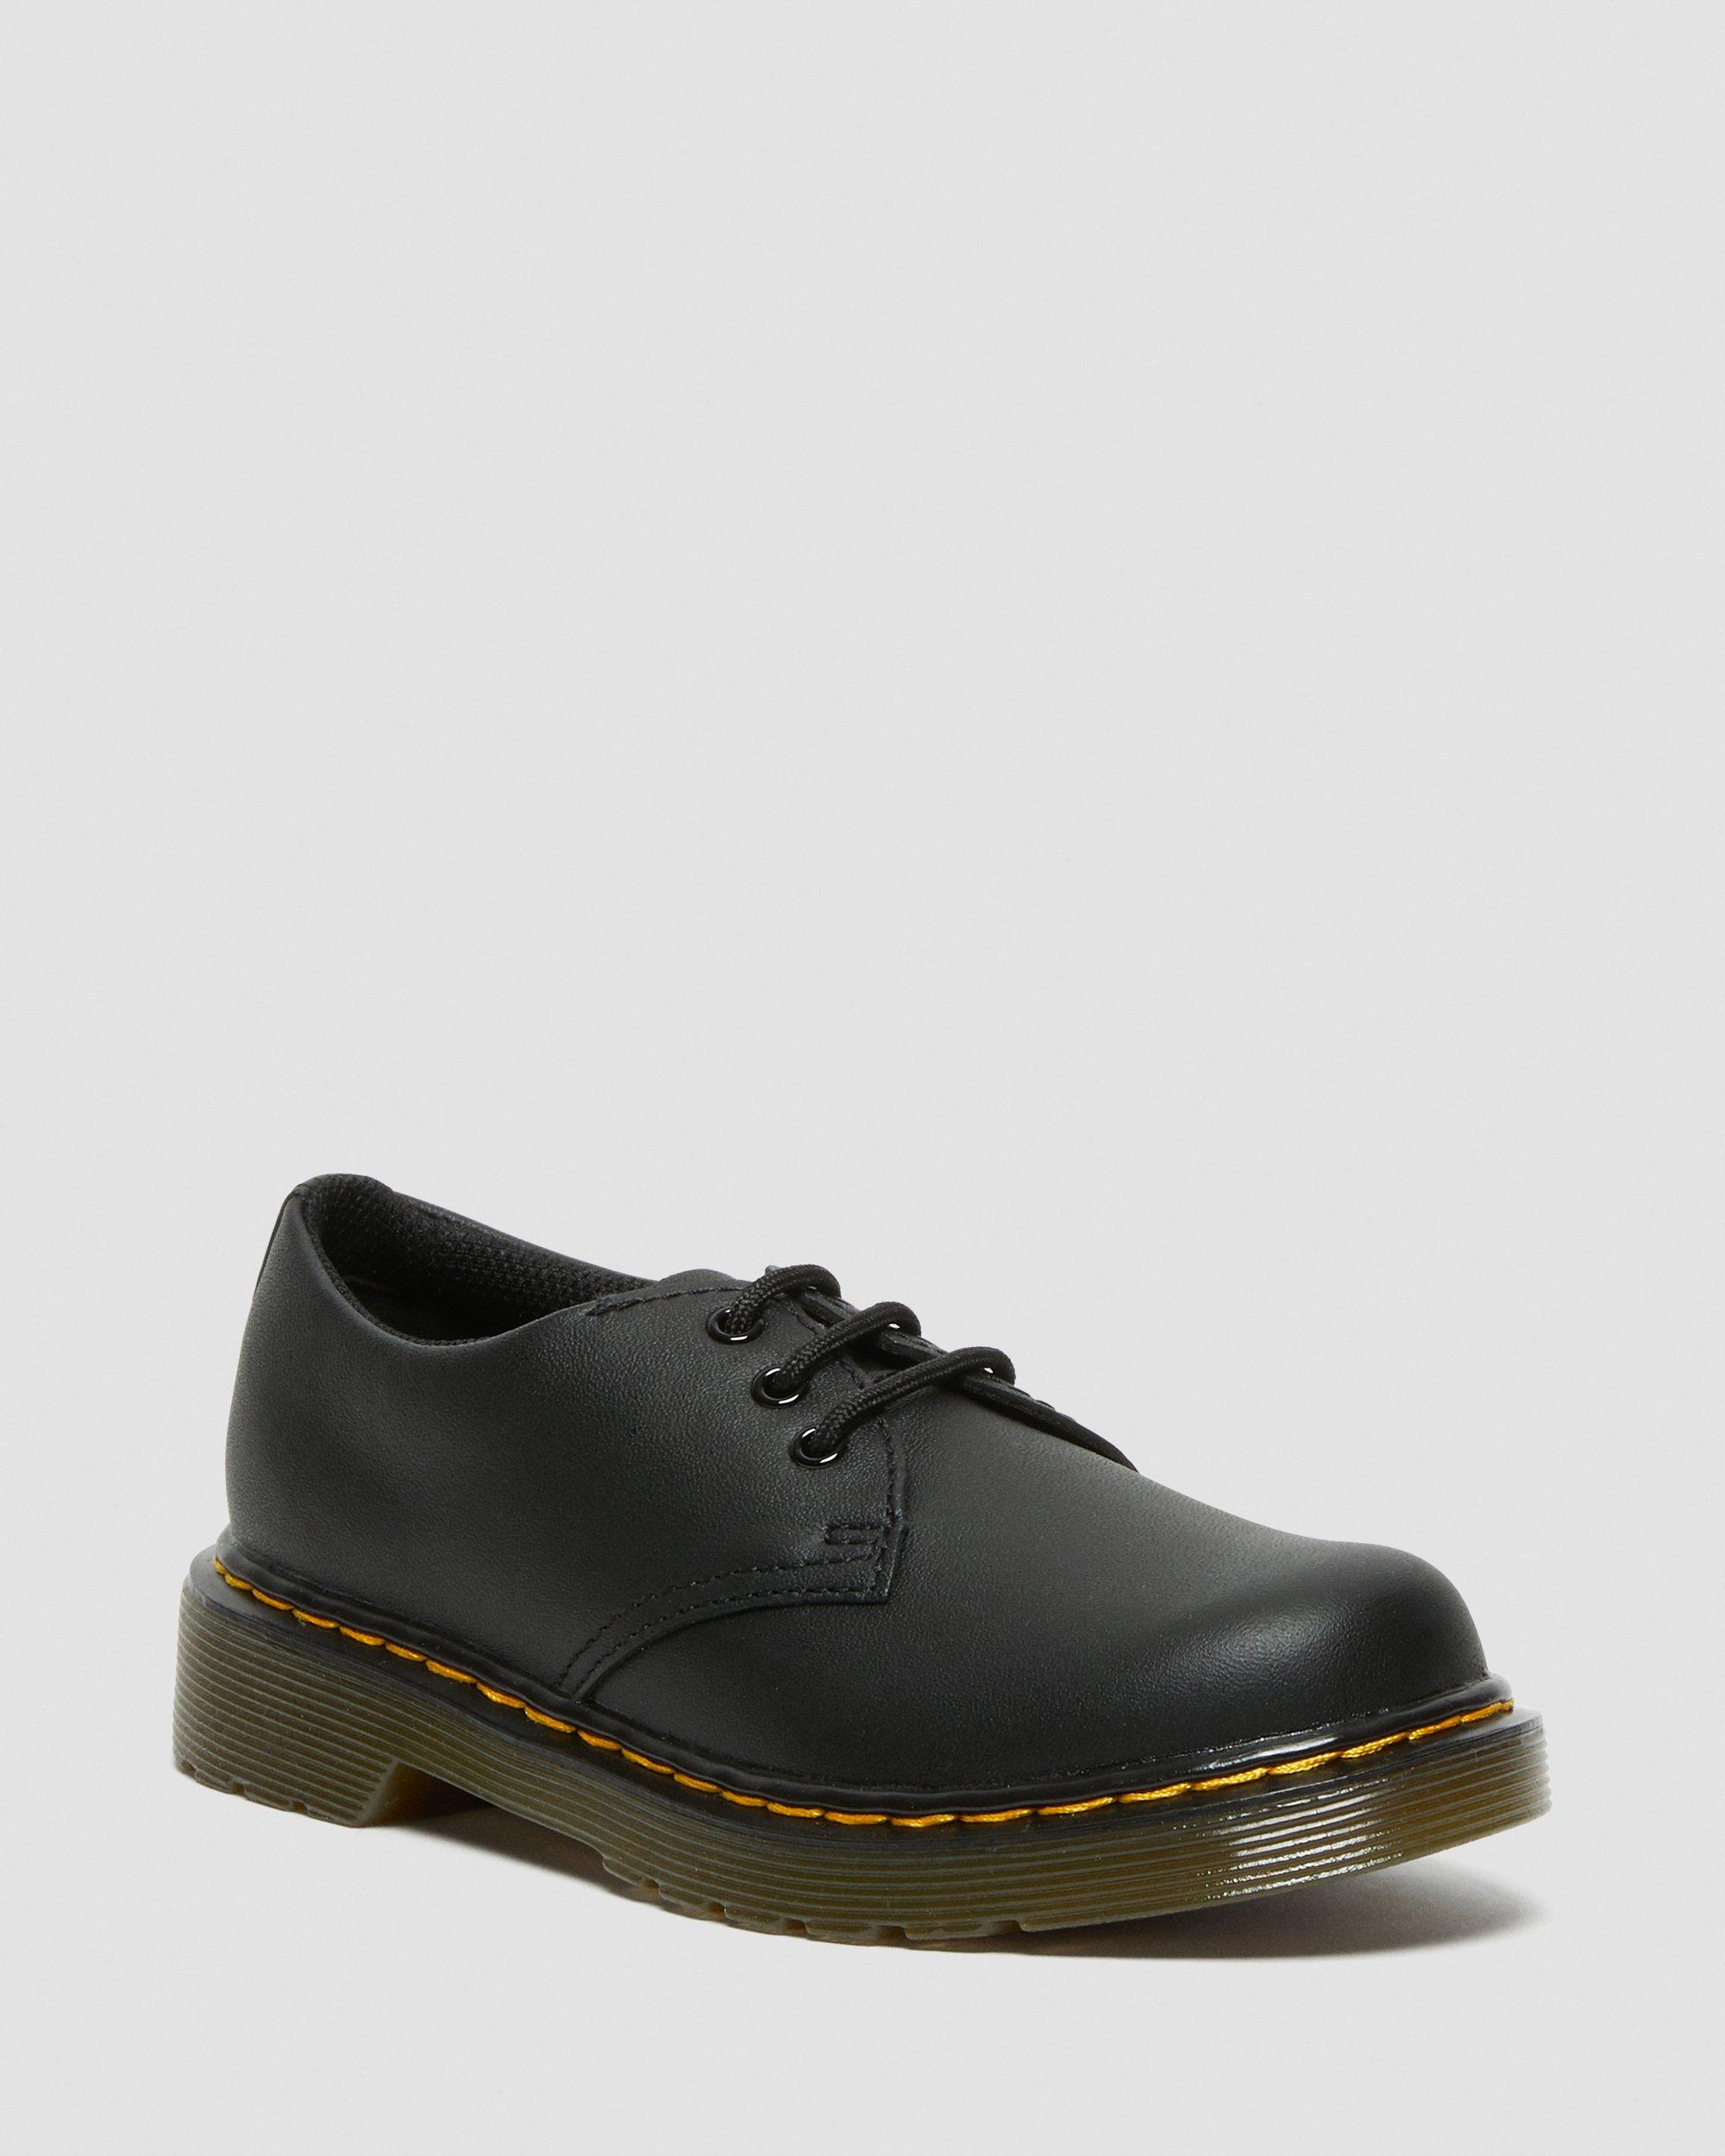 Junior 1461 Softy T Leather Shoes in Black | Dr. Martens